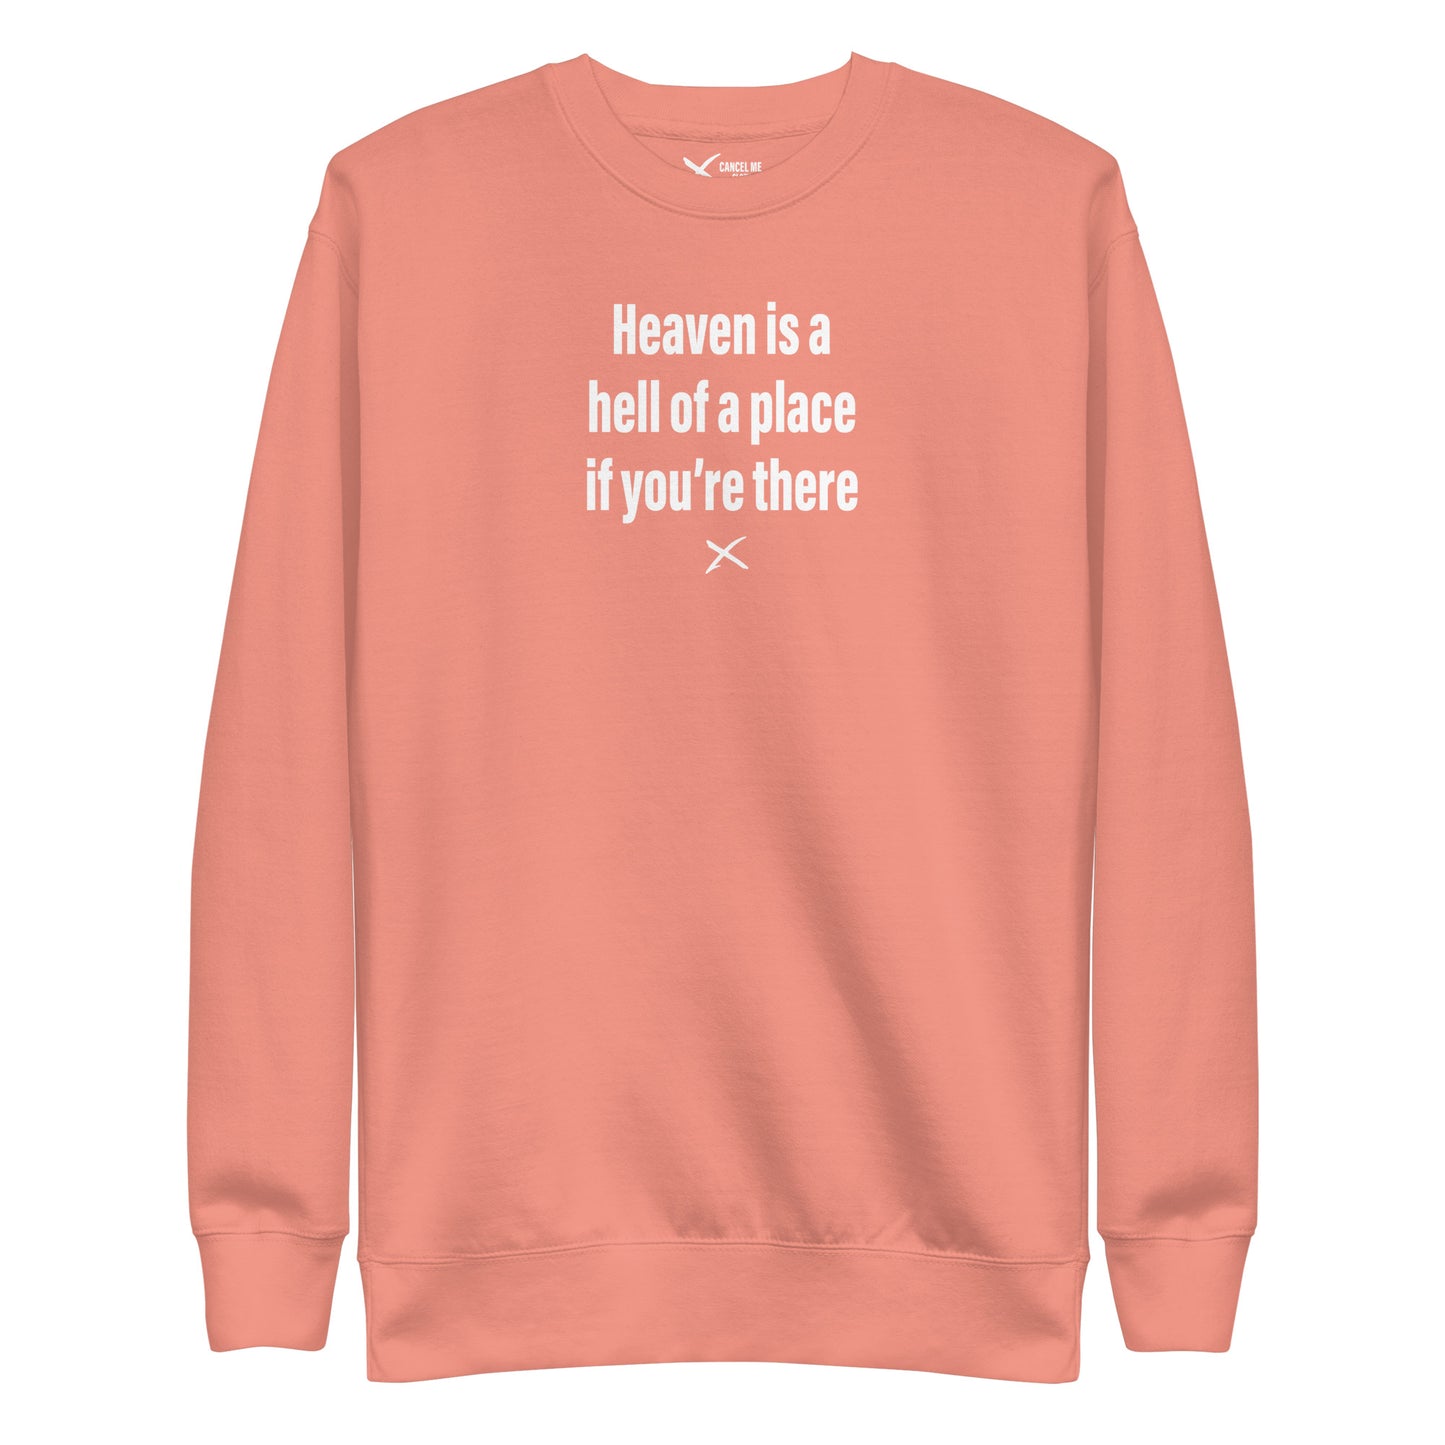 Heaven is a hell of a place if you're there - Sweatshirt